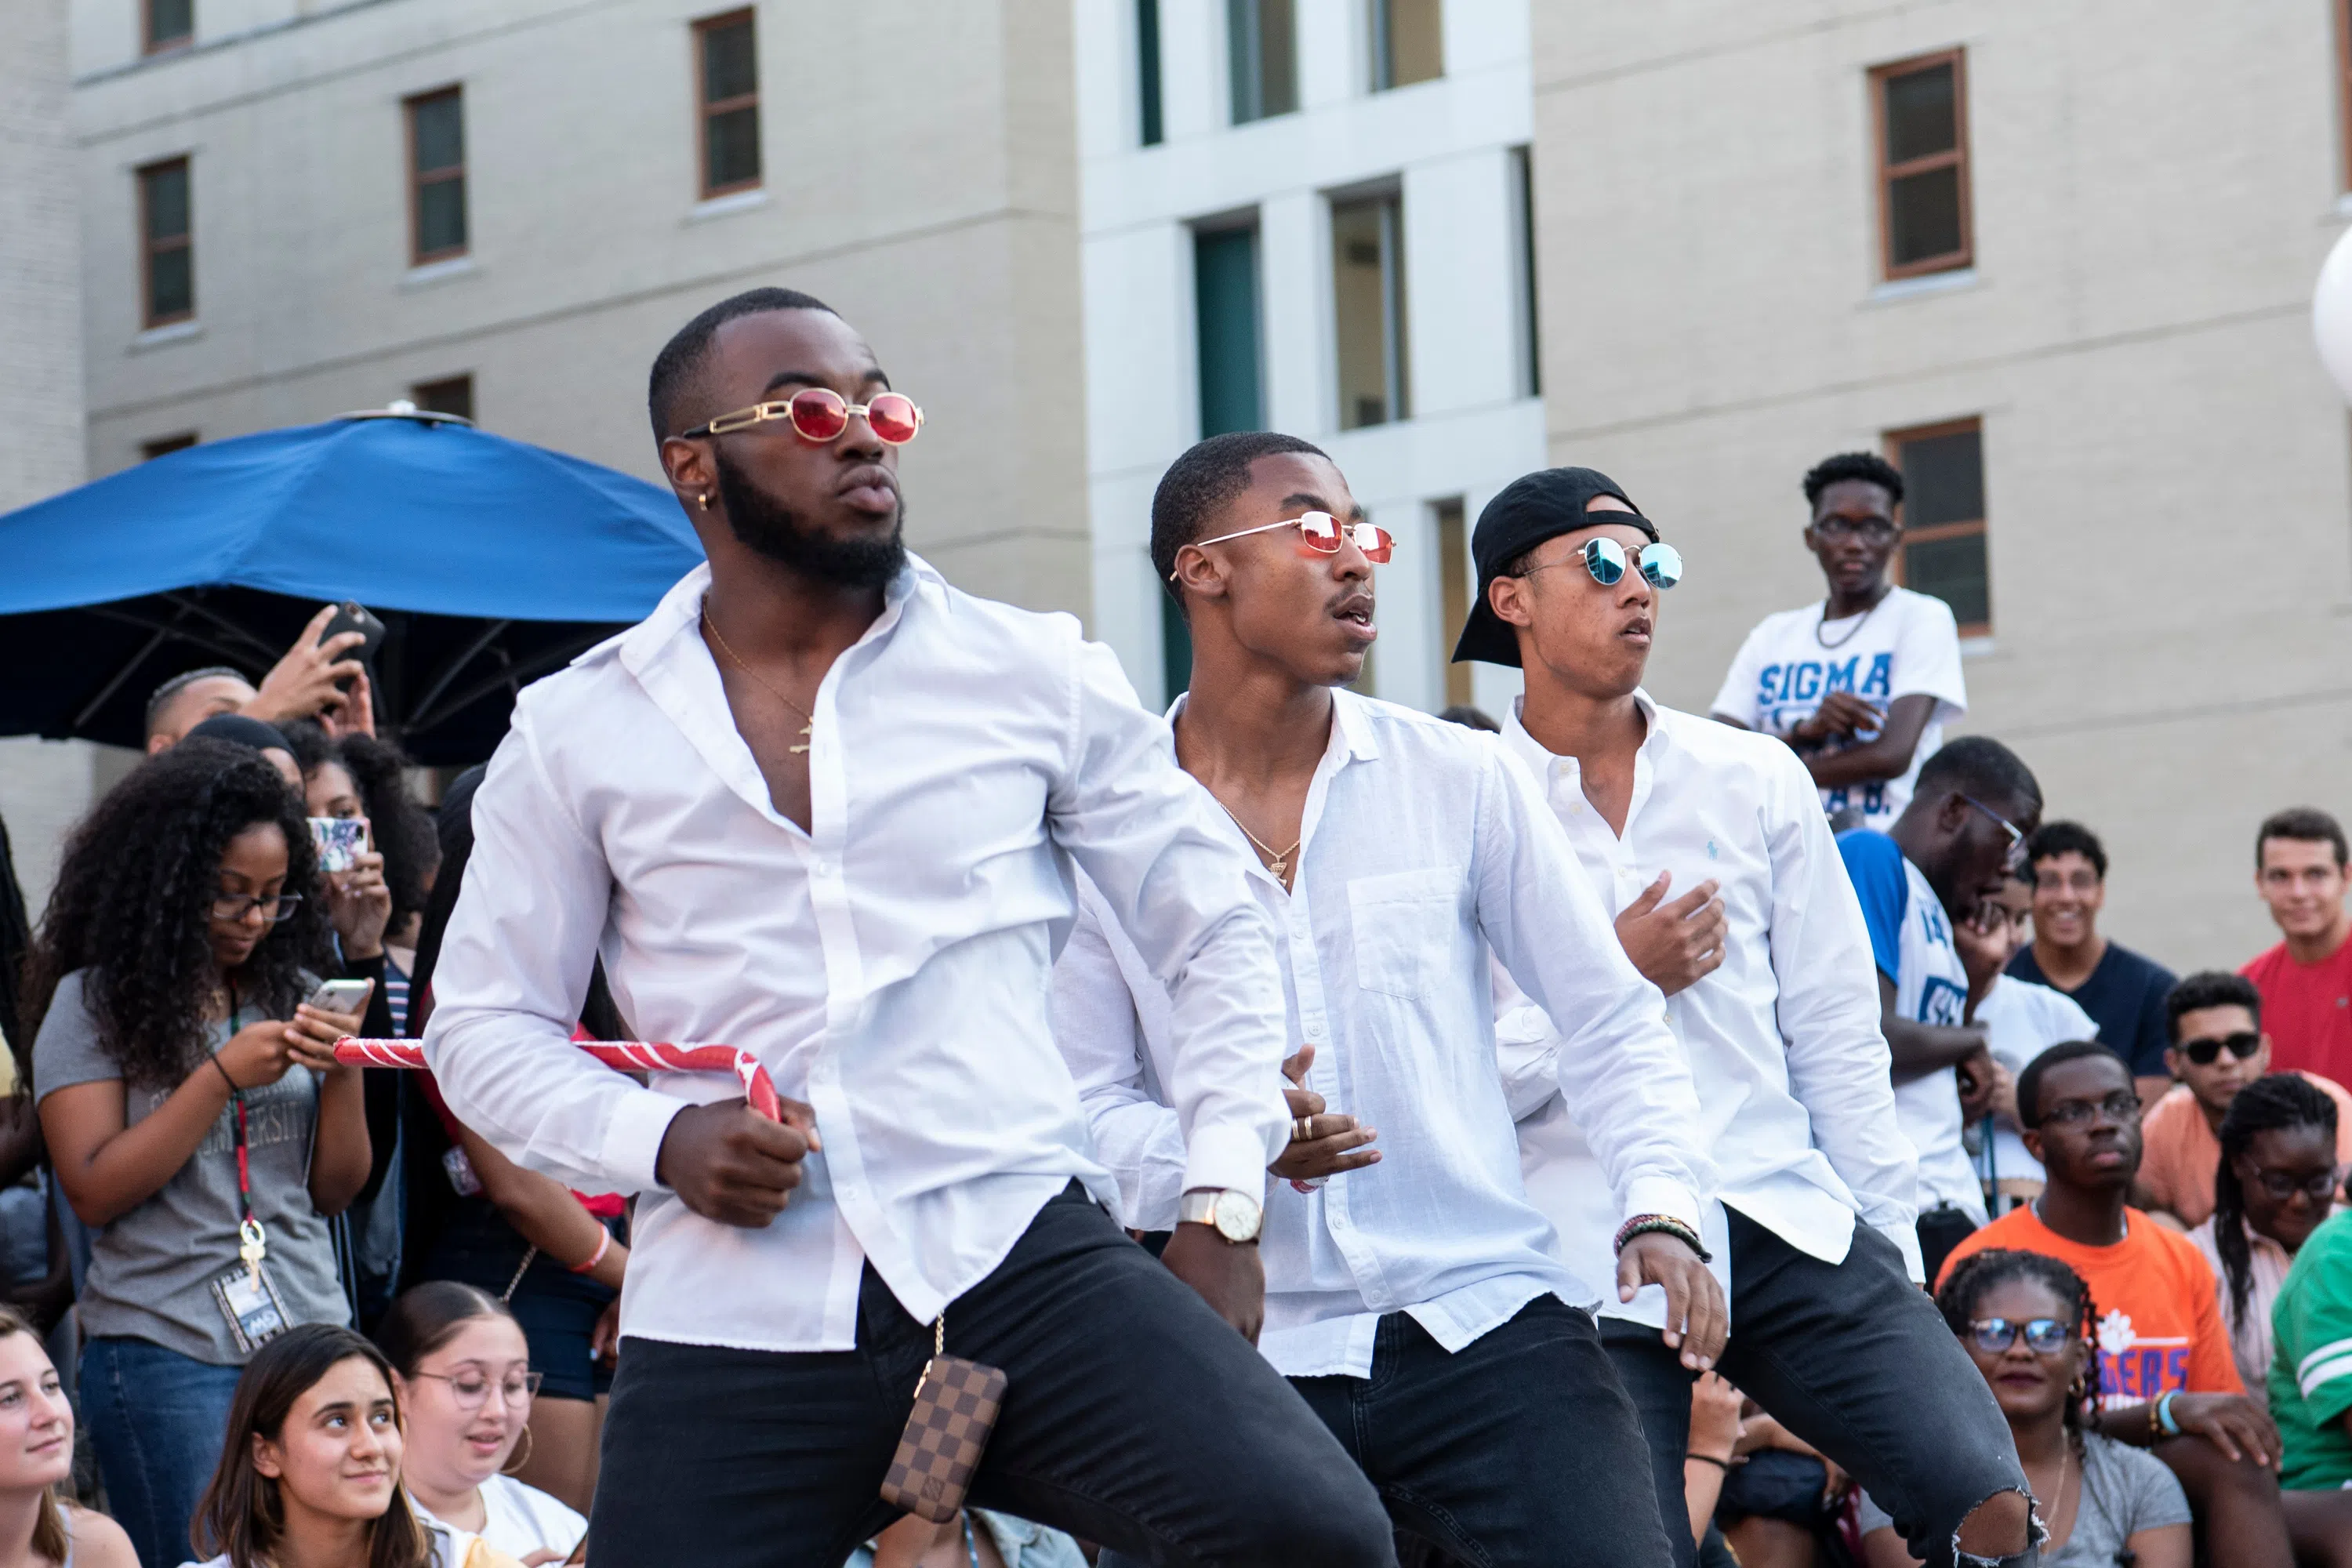 Students in a fraternity dance at a block party